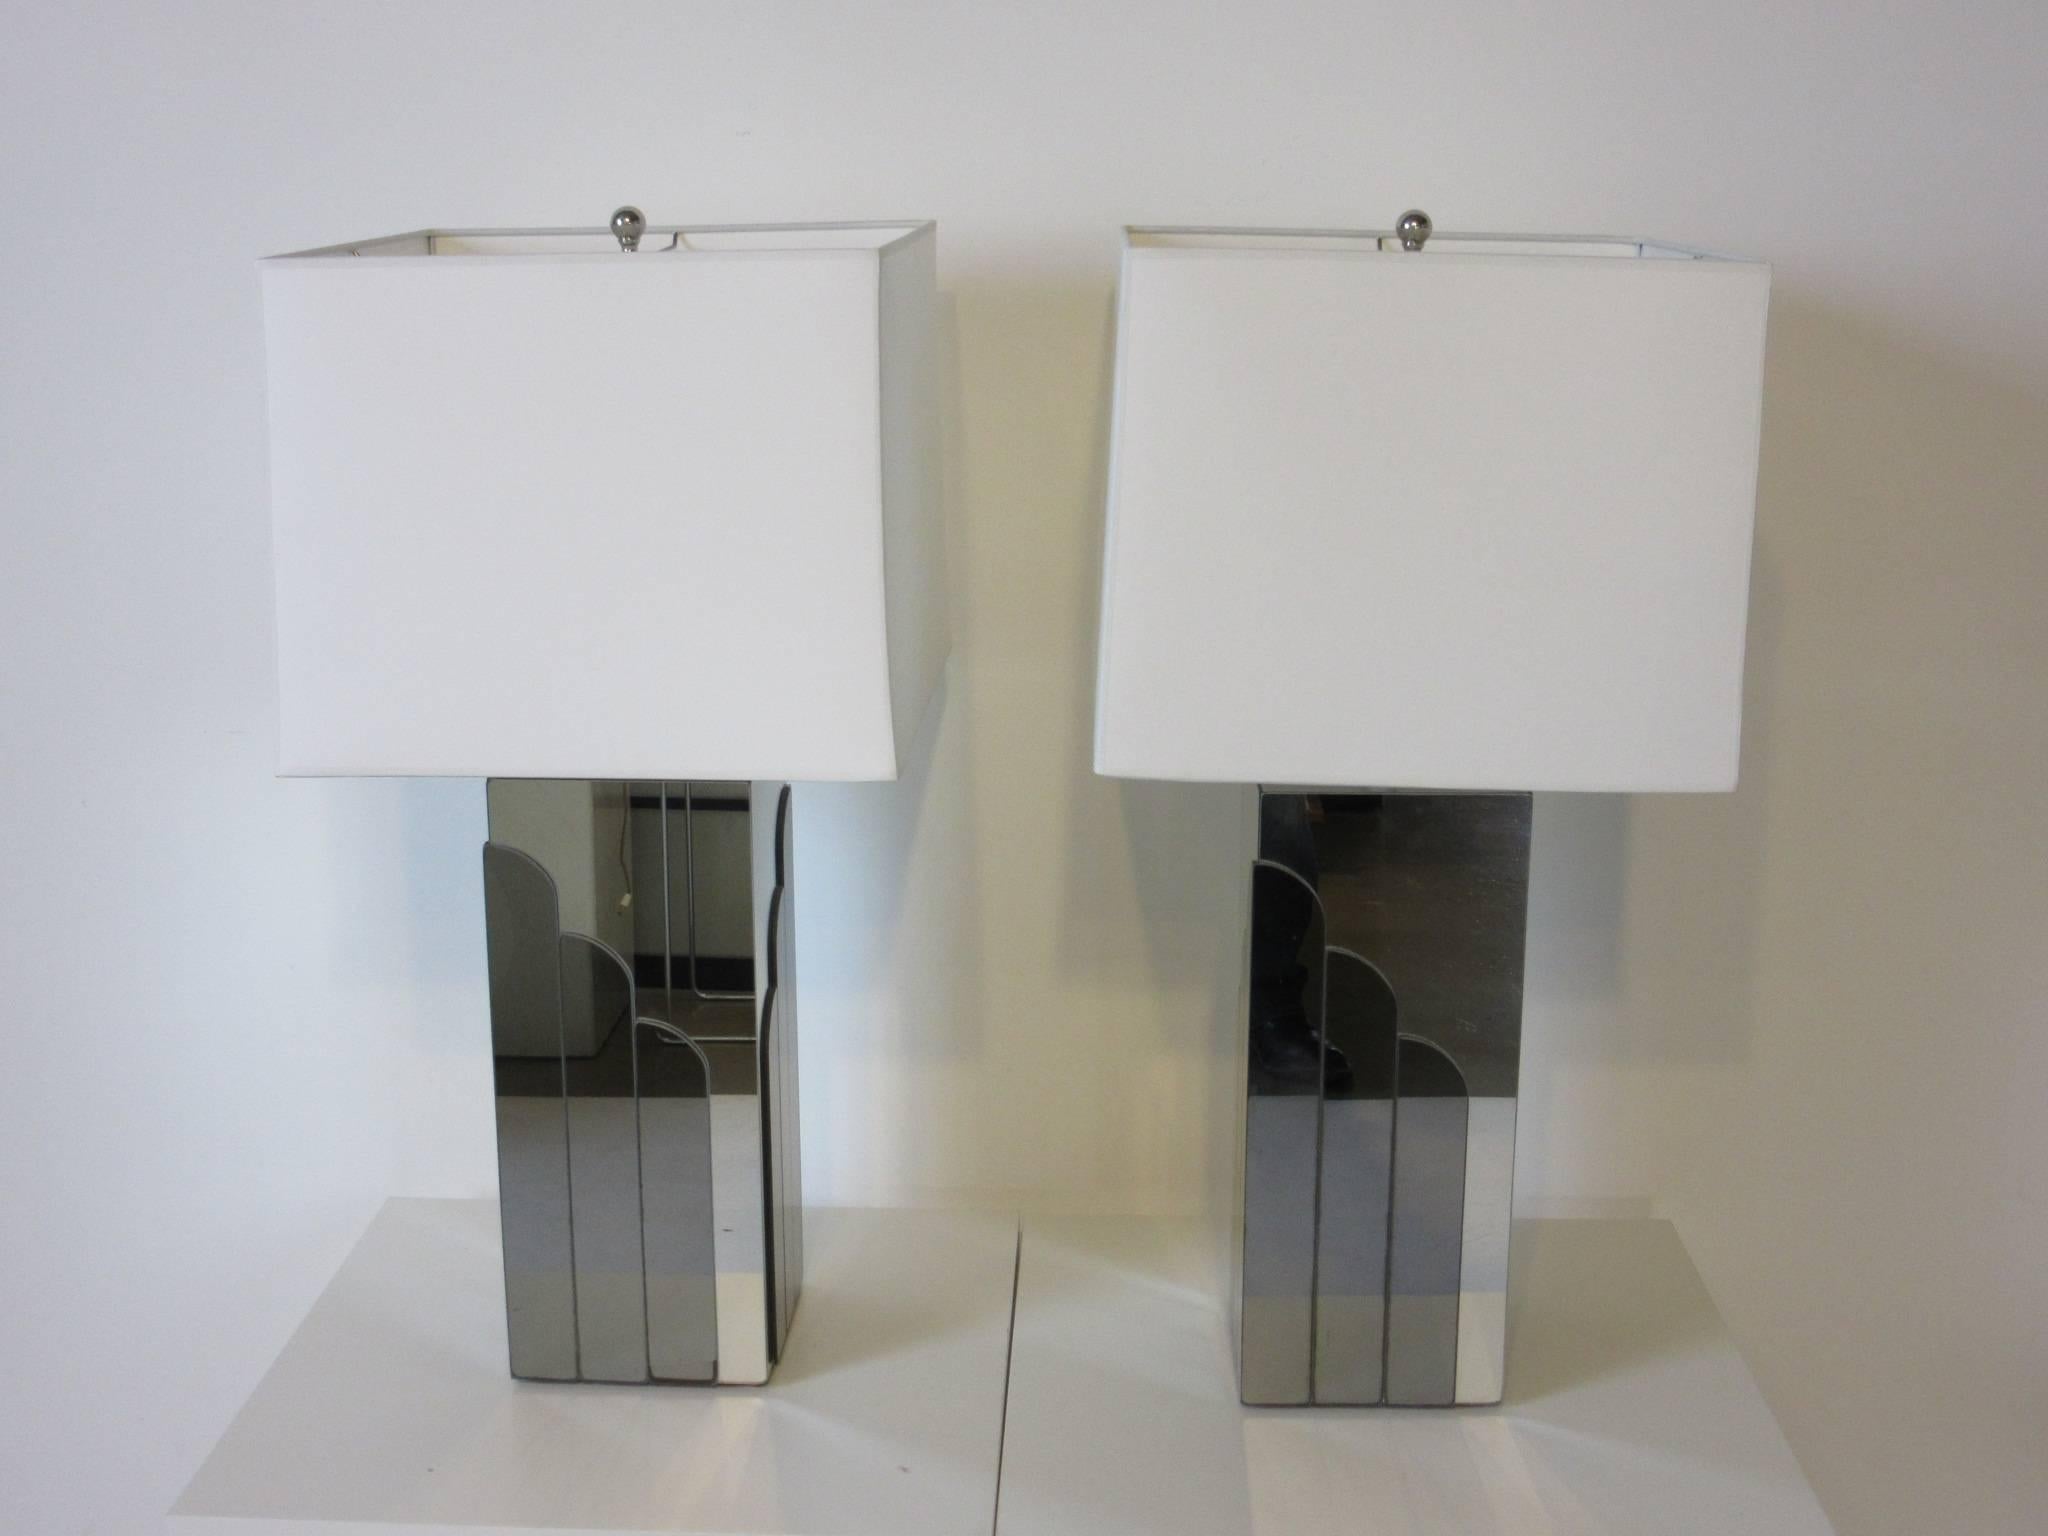 American Glamorous 1970's Pierre Cardin Styled Mirrored Table Lamps For Sale